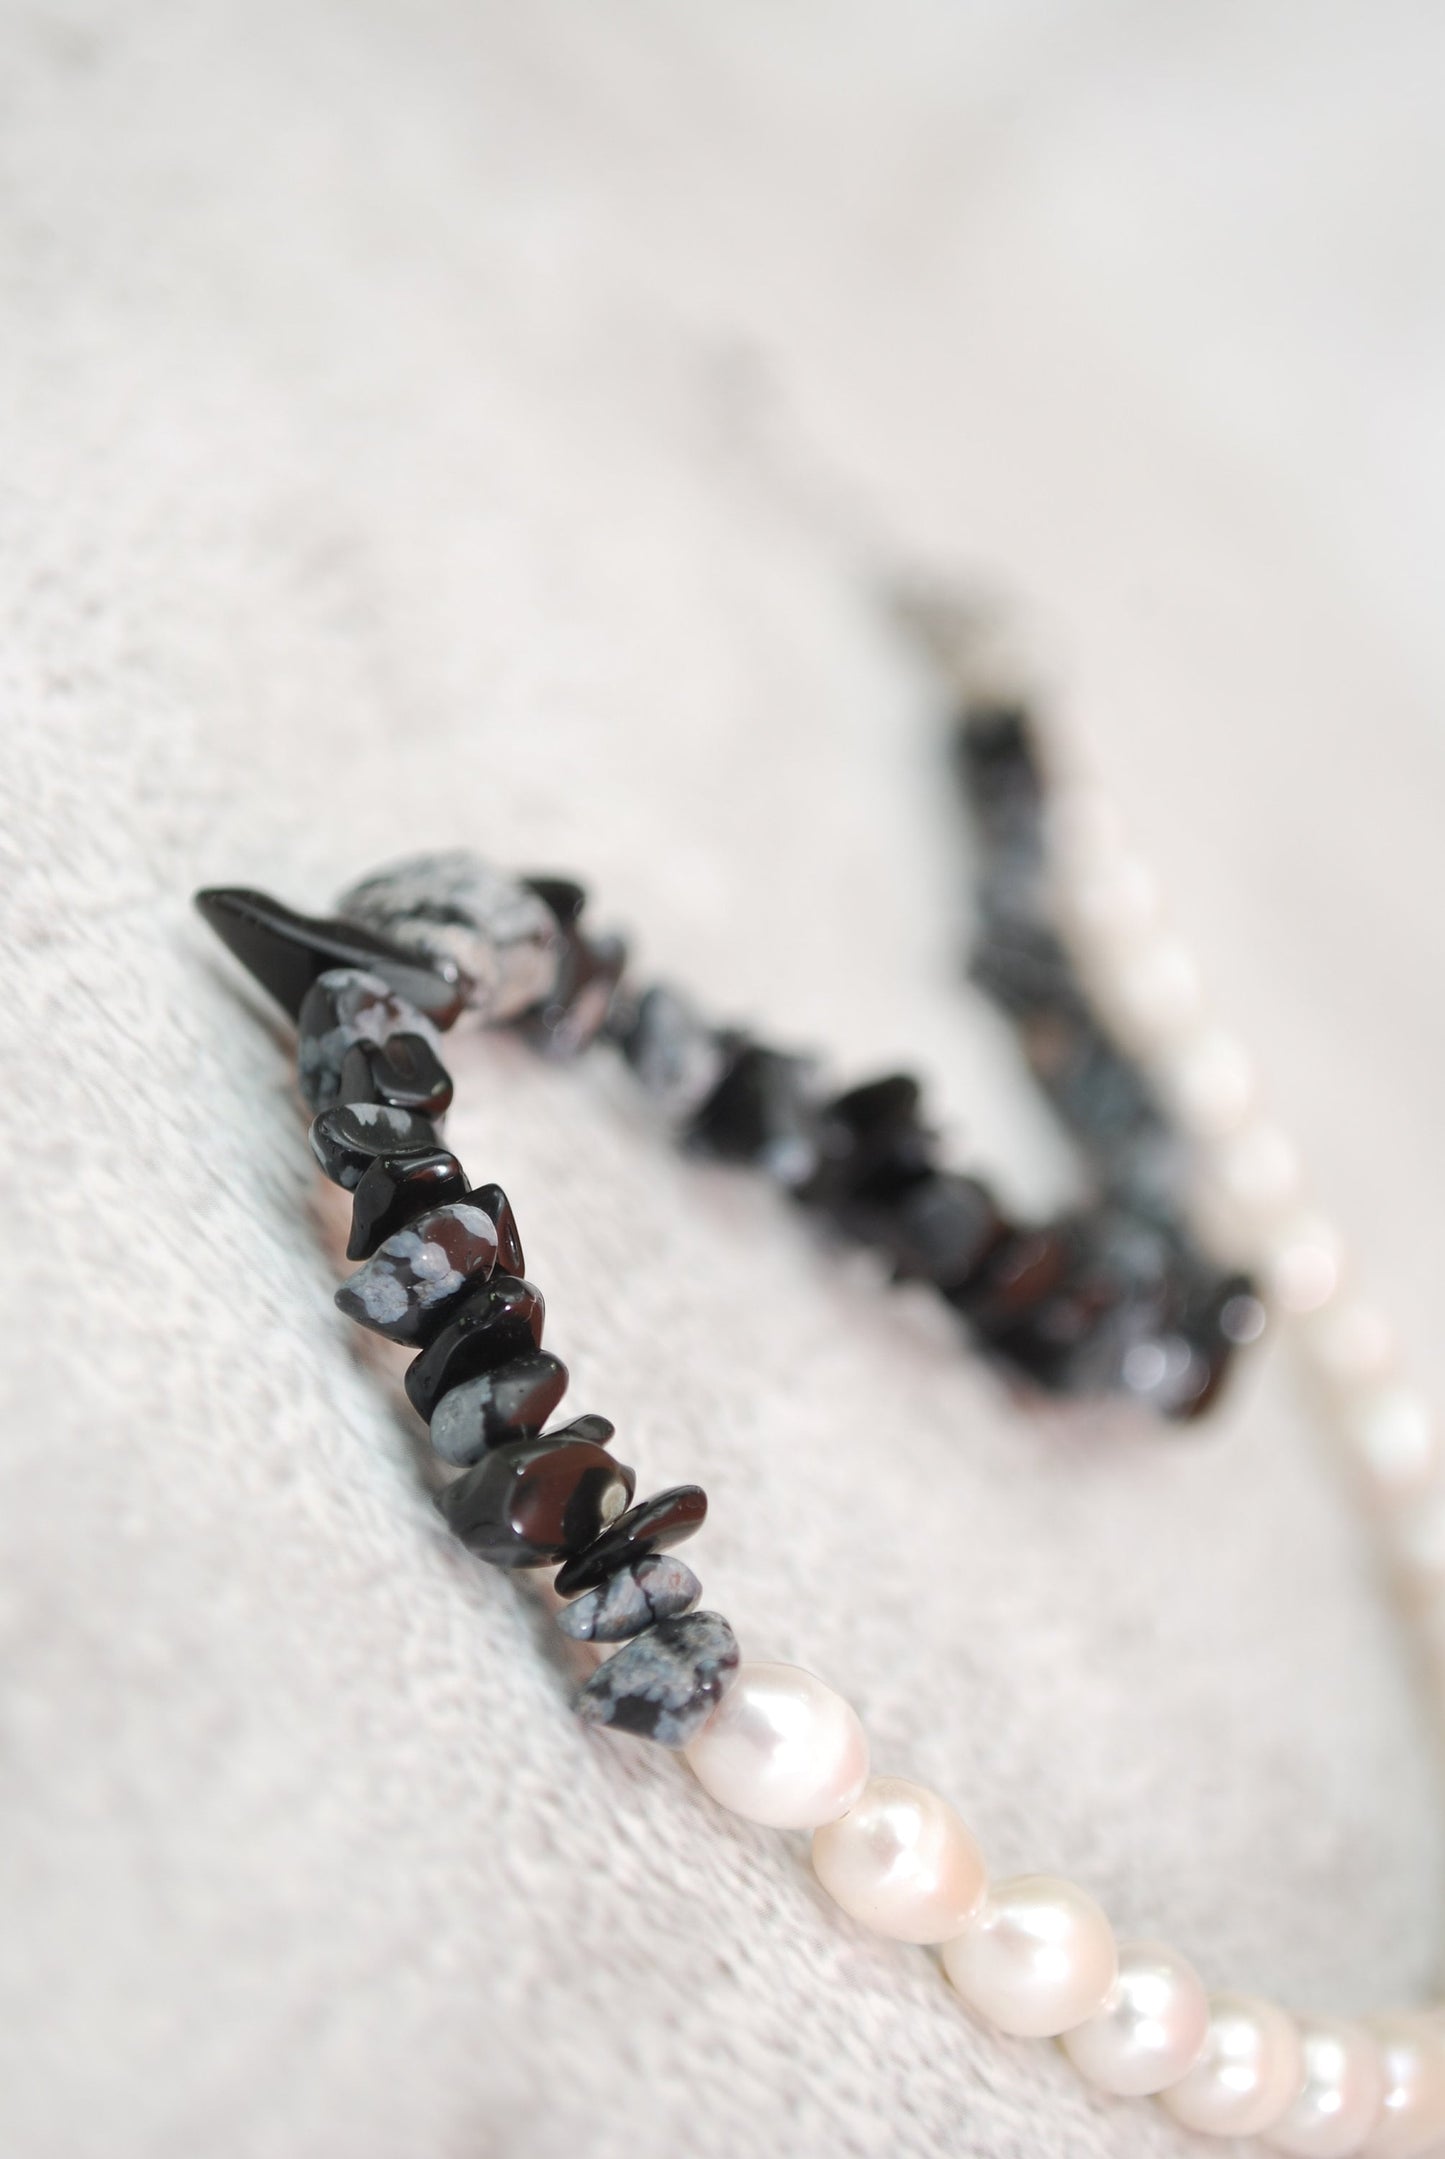 Back and white necklace, half freshwater pearl & half black stone beads choker necklace, 46cm 18"